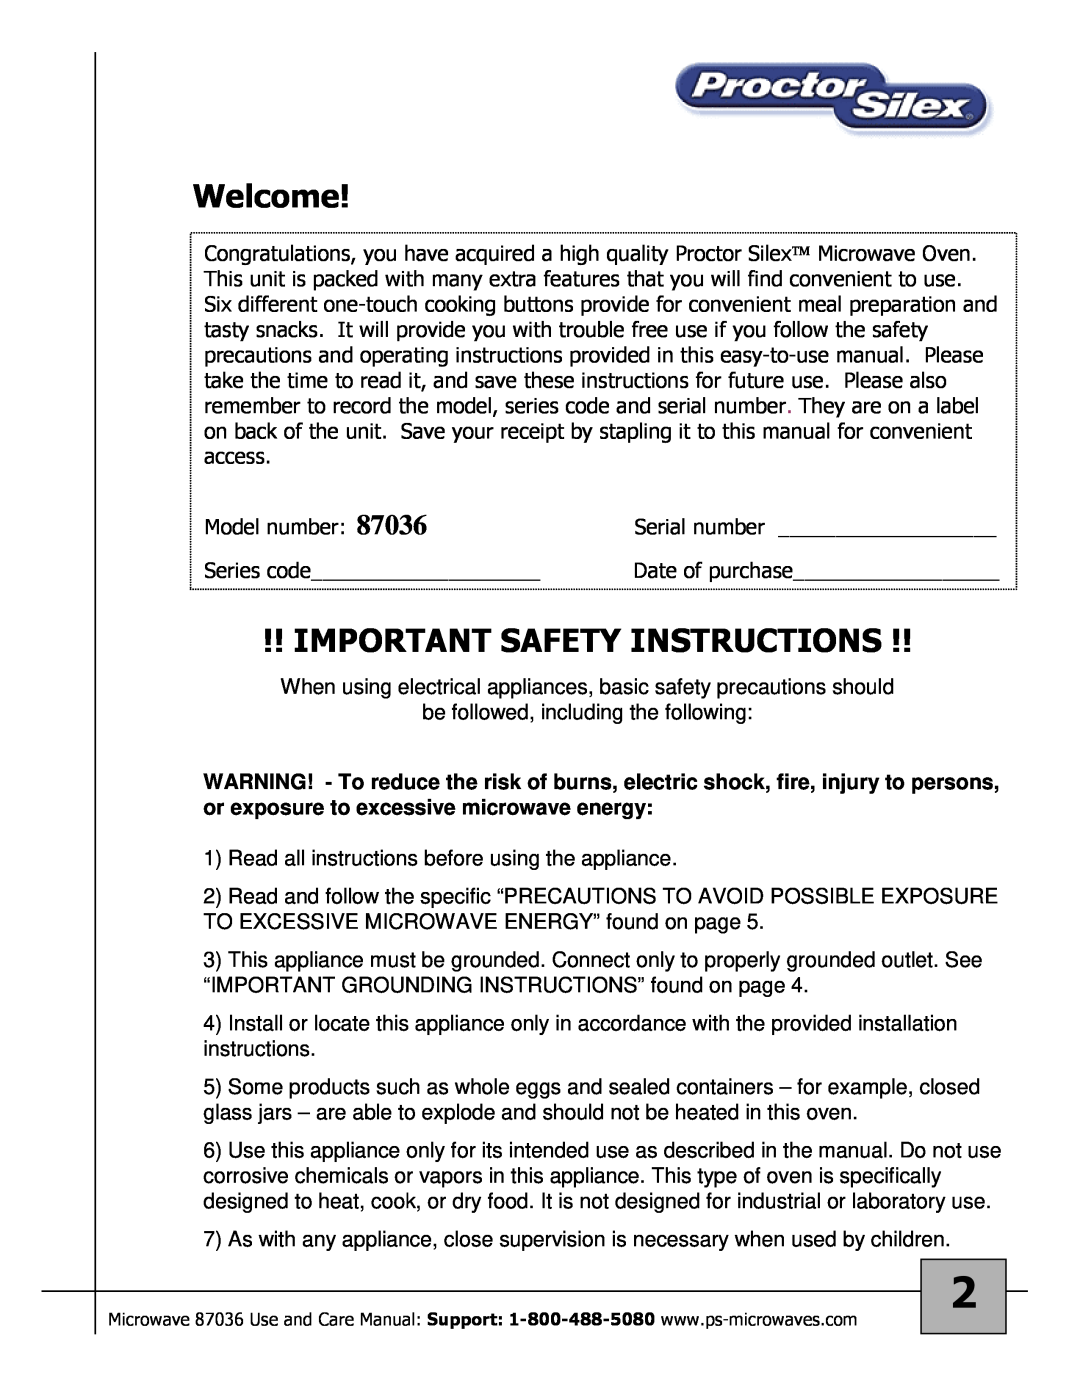 Proctor-Silex 87036 owner manual Welcome, Important Safety Instructions 